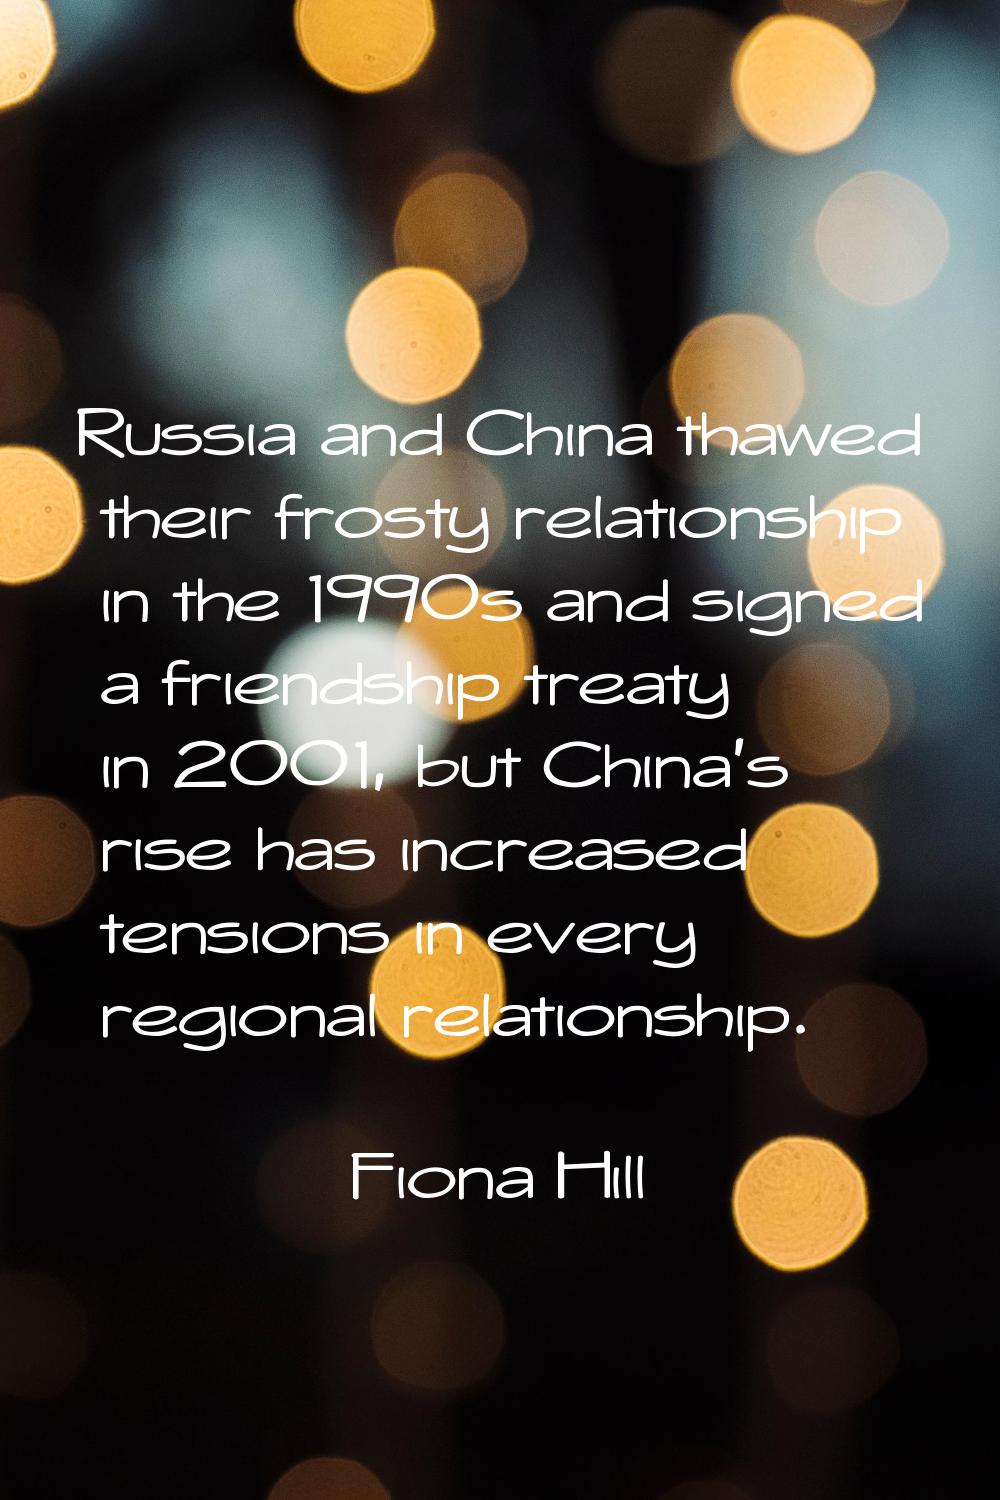 Russia and China thawed their frosty relationship in the 1990s and signed a friendship treaty in 20